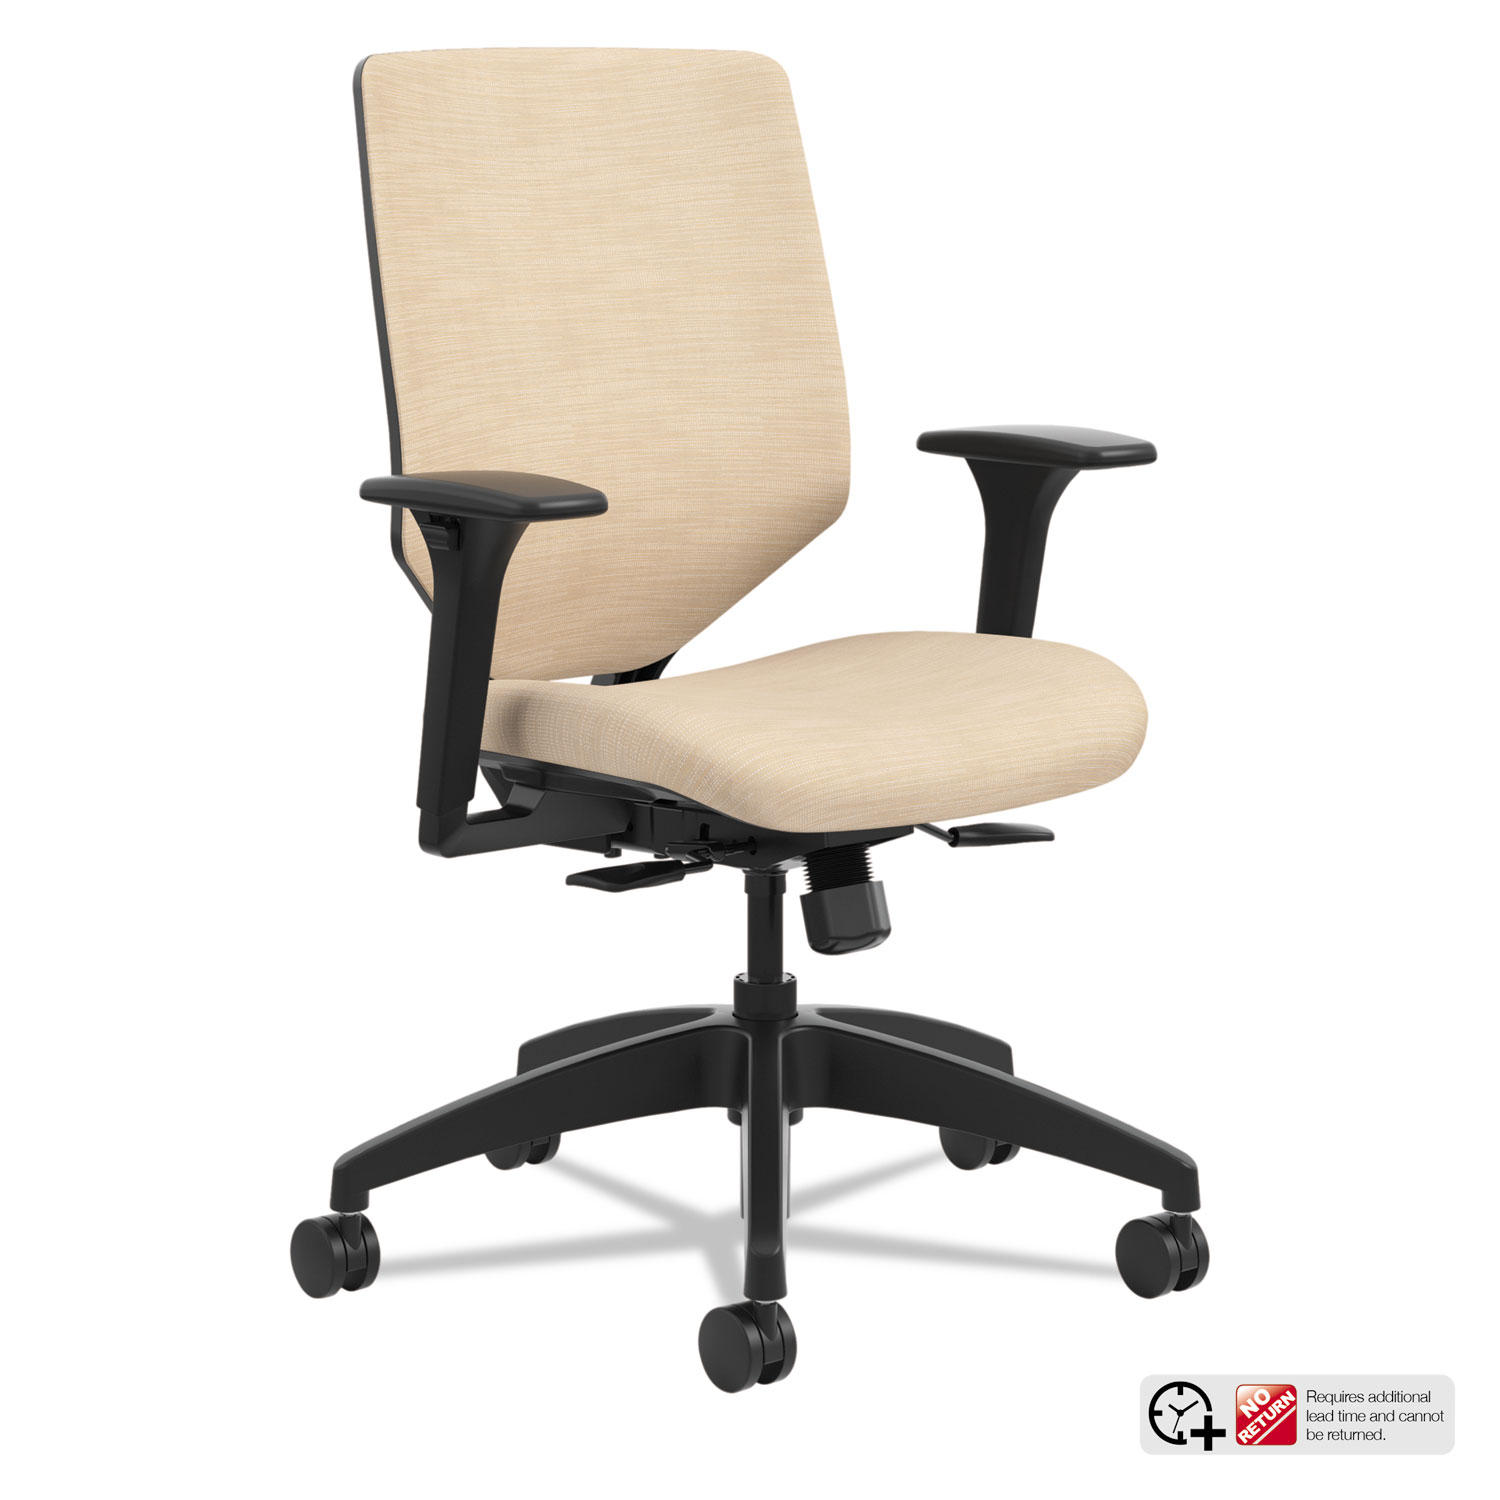  HON SVU1ACLC22TK Solve Series Upholstered Back Task Chair, Supports up to 300 lbs., Putty Seat/Putty Back, Black Base (HONSVU1ACLC22TK) 